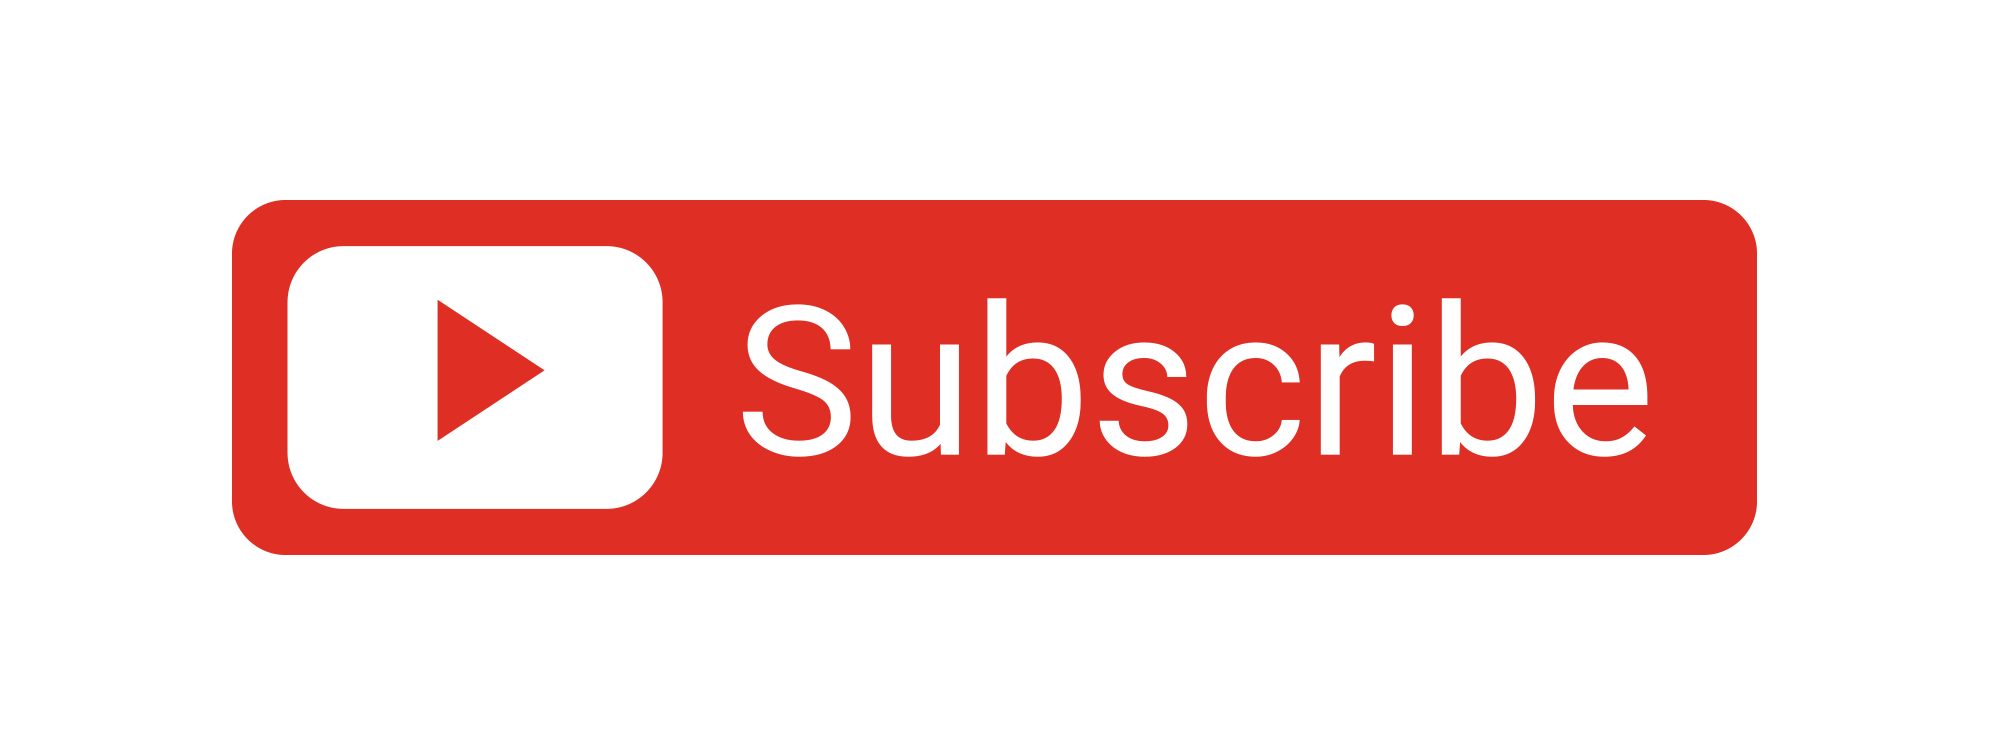 youtube subscribe button png image download #33253